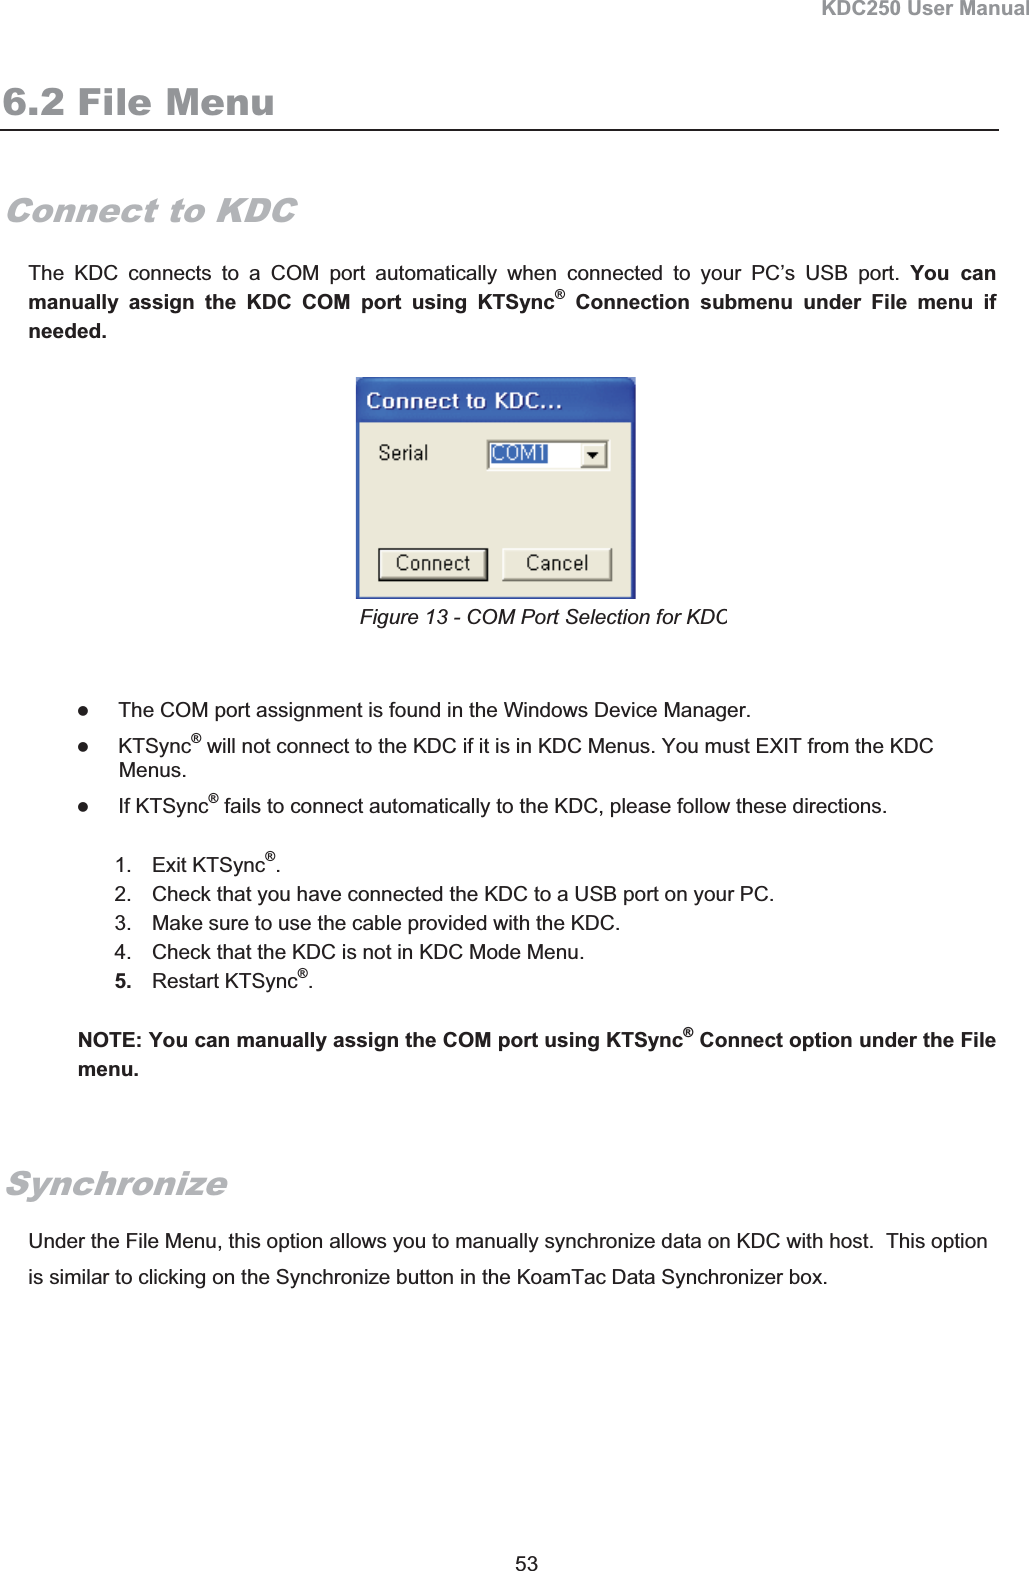 KDC250 User Manual 53 6.2 File MenuConnect to KDC The KDC connects to a COM port automatically when connected to your PC’s USB port. You can manually assign the KDC COM port using KTSync® Connection submenu under File menu if needed. zThe COM port assignment is found in the Windows Device Manager. zKTSync® will not connect to the KDC if it is in KDC Menus. You must EXIT from the KDC Menus. zIf KTSync® fails to connect automatically to the KDC, please follow these directions. 1. Exit KTSync®.2.  Check that you have connected the KDC to a USB port on your PC. 3.  Make sure to use the cable provided with the KDC.   4.  Check that the KDC is not in KDC Mode Menu.   5. Restart KTSync®.NOTE: You can manually assign the COM port using KTSync® Connect option under the File menu.SynchronizeUnder the File Menu, this option allows you to manually synchronize data on KDC with host.  This option is similar to clicking on the Synchronize button in the KoamTac Data Synchronizer box.  Figure 13 - COM Port Selection for KDC